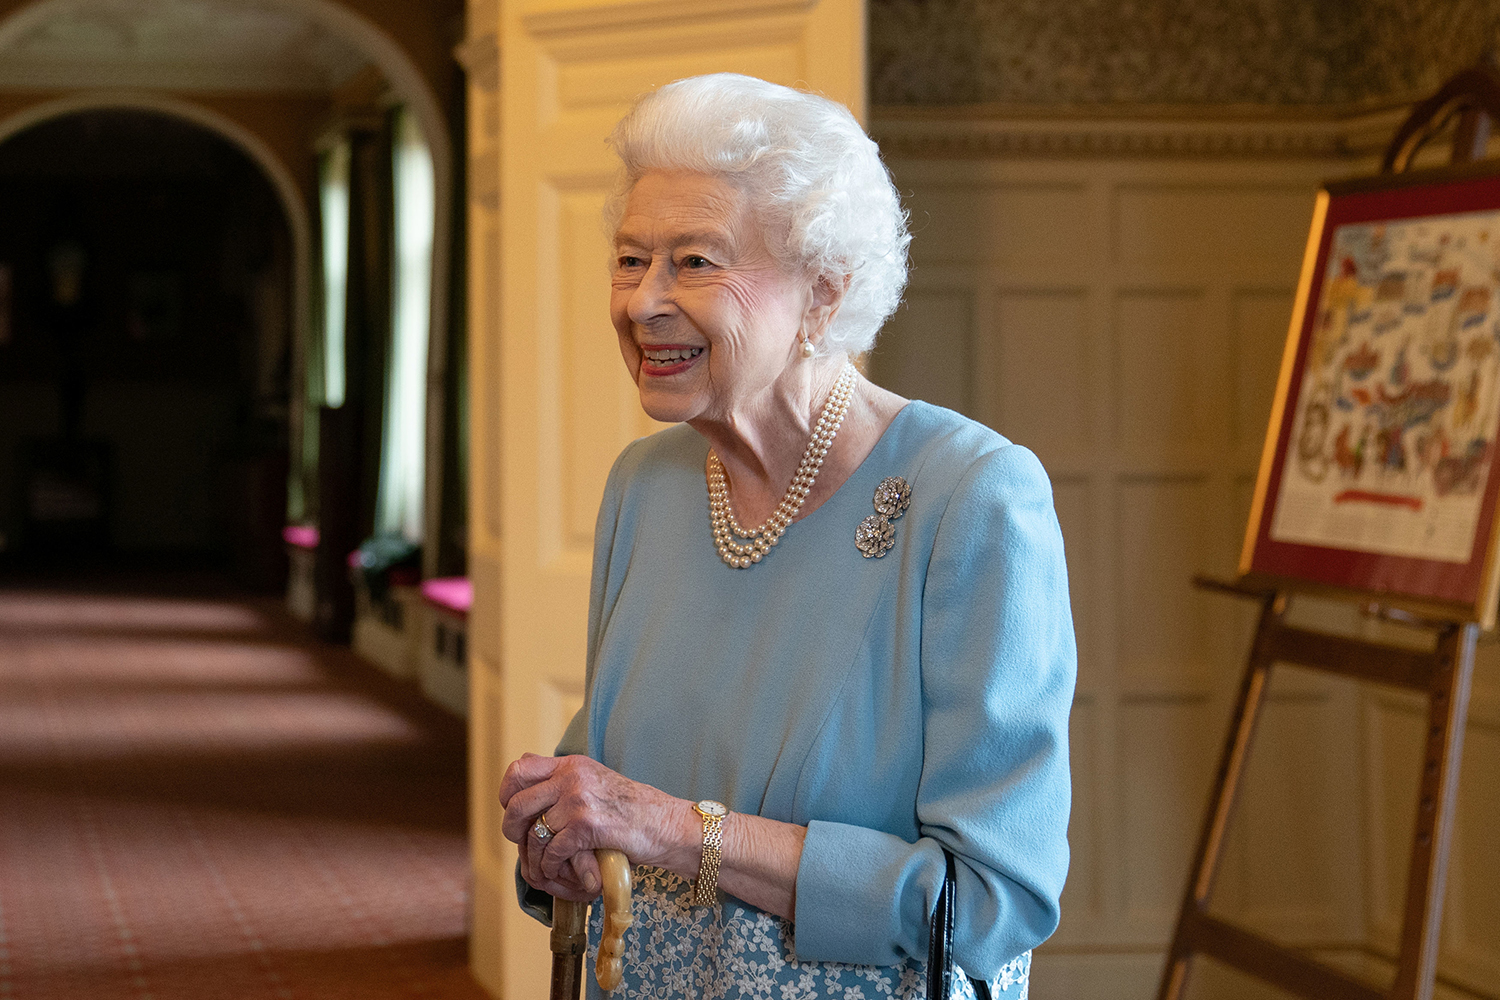 Queen Elizabeth II celebrates the start of the Platinum Jubilee, just weeks before testing positive for COVID-19